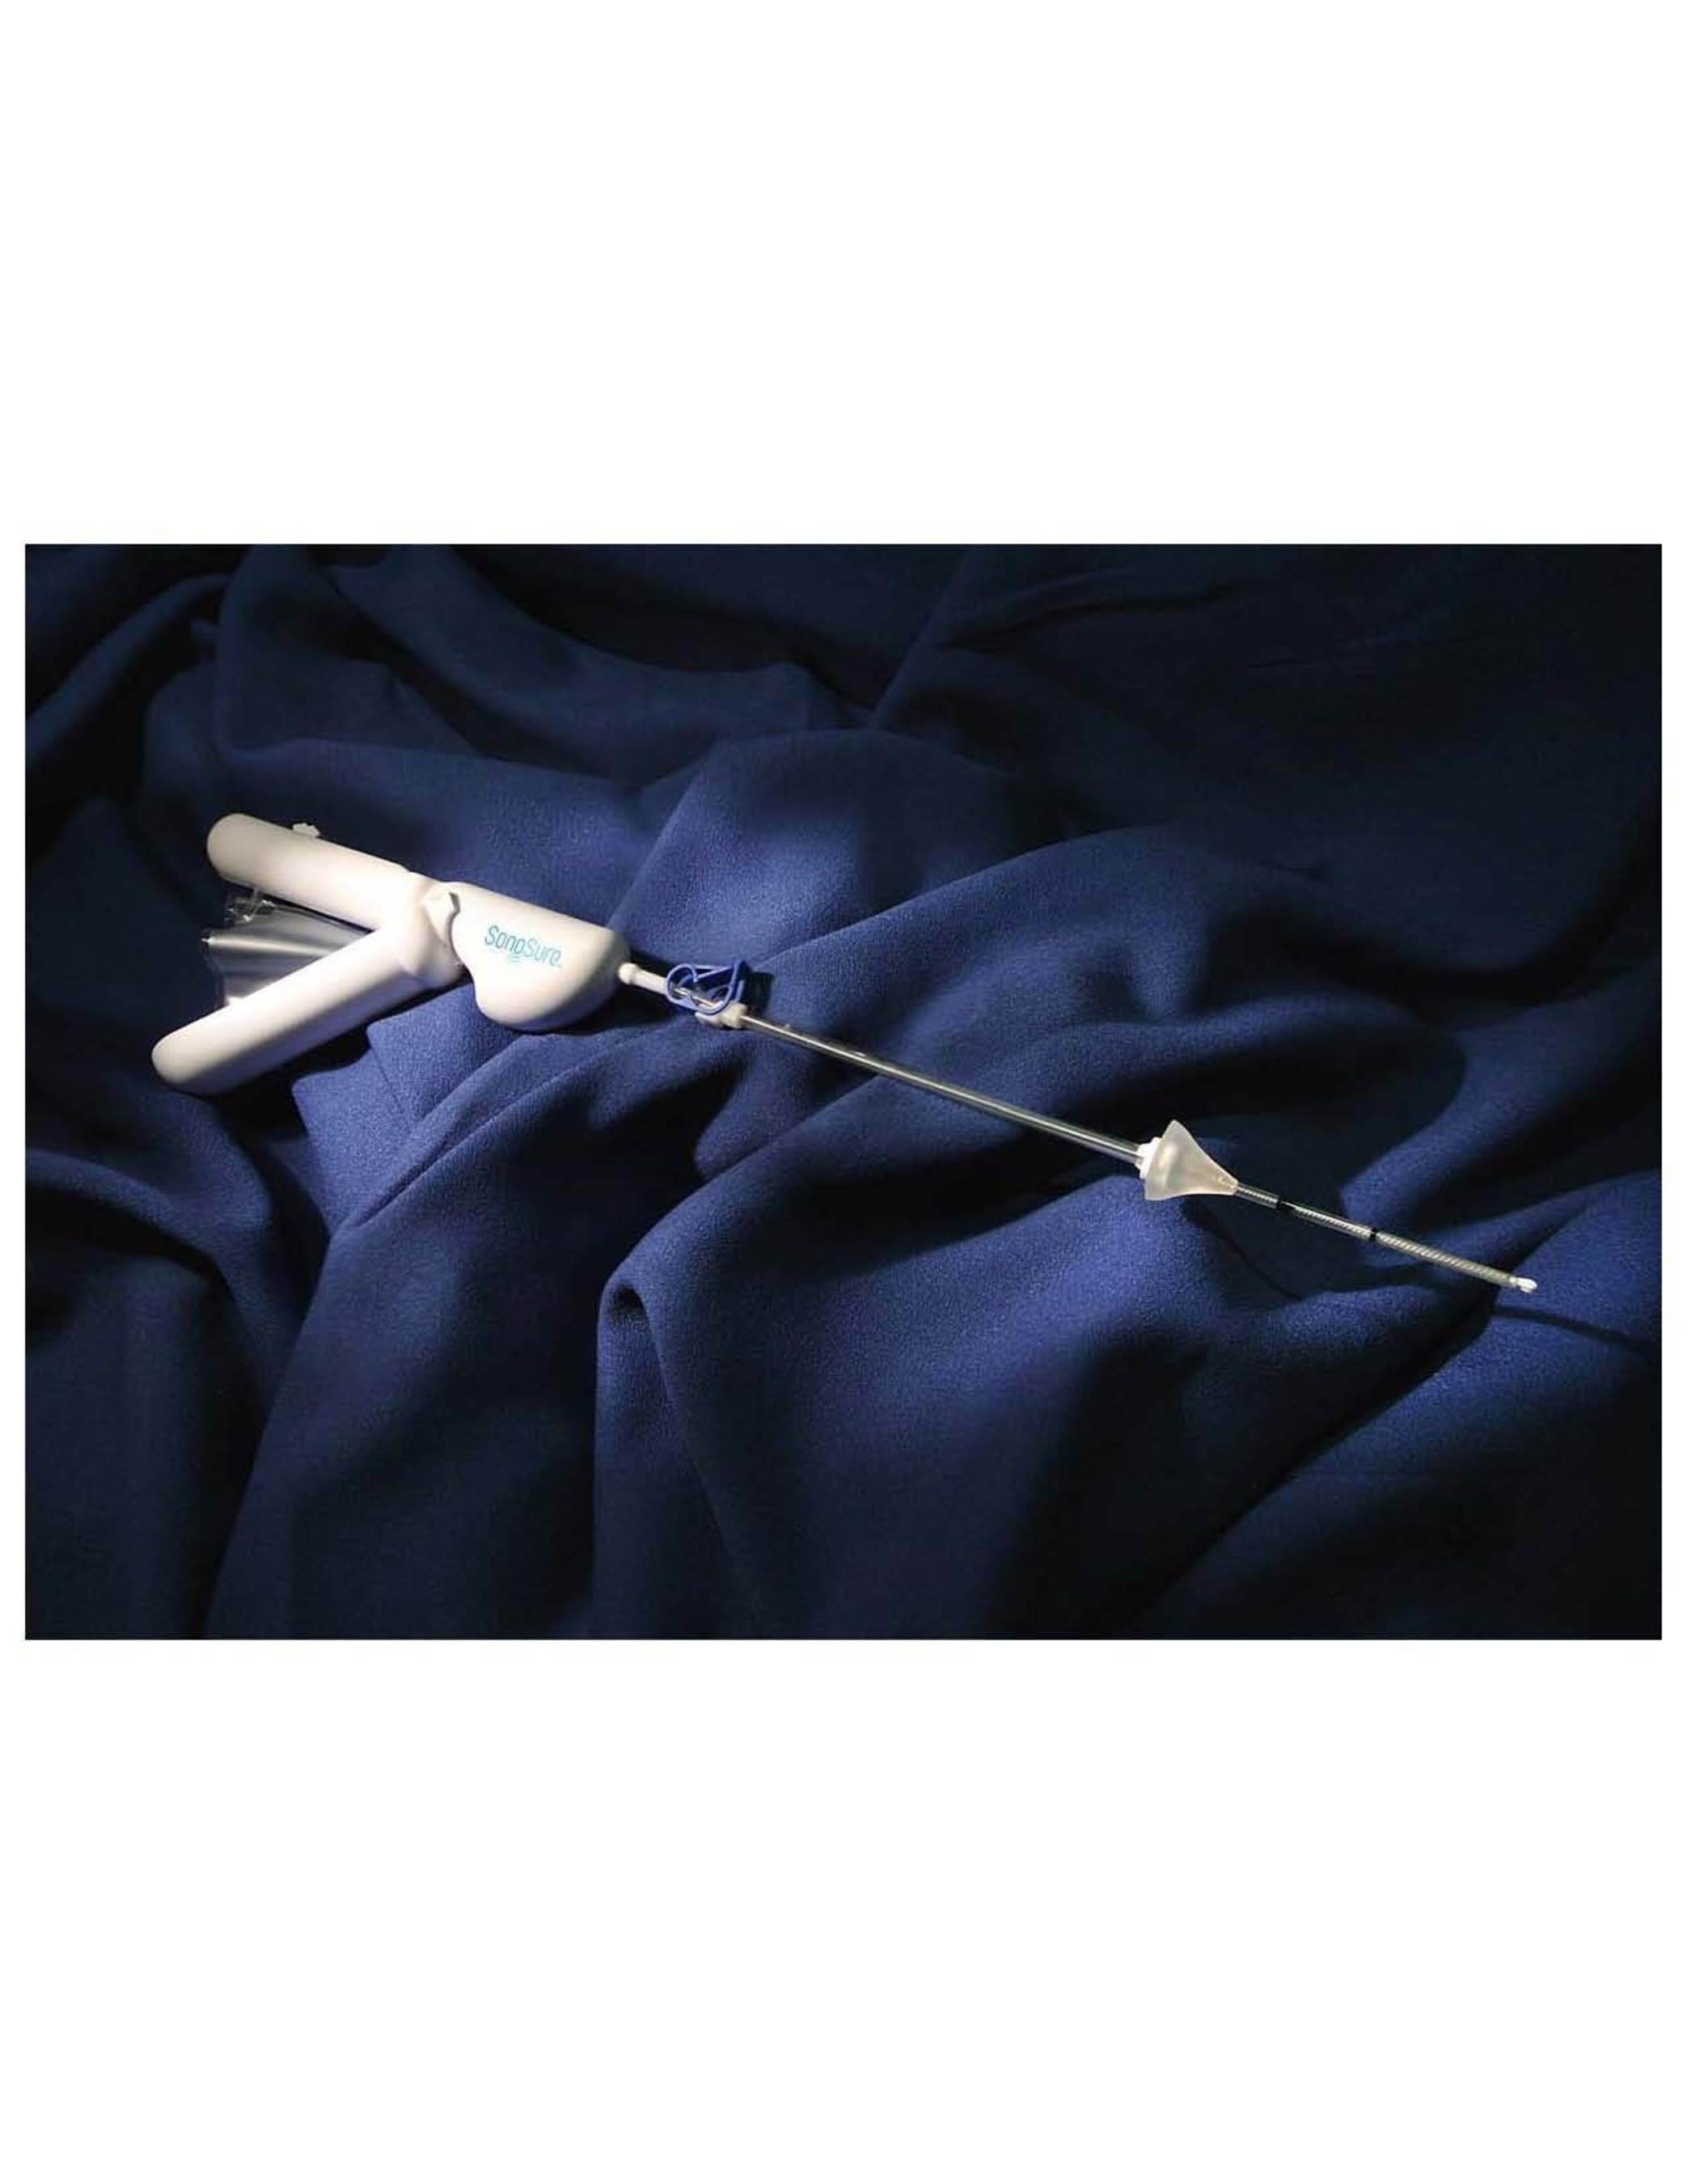 CrossBay Medical Inc.'s SonoSure(TM) Sonohysterography and Endometrial Sampling Device is indicated for use to access the uterine cavity for saline infusion sonohysterography and to obtain endometrial biopsy, if indicated, utilizing the same device.  (PRNewsFoto/CrossBay Medical, Inc.)